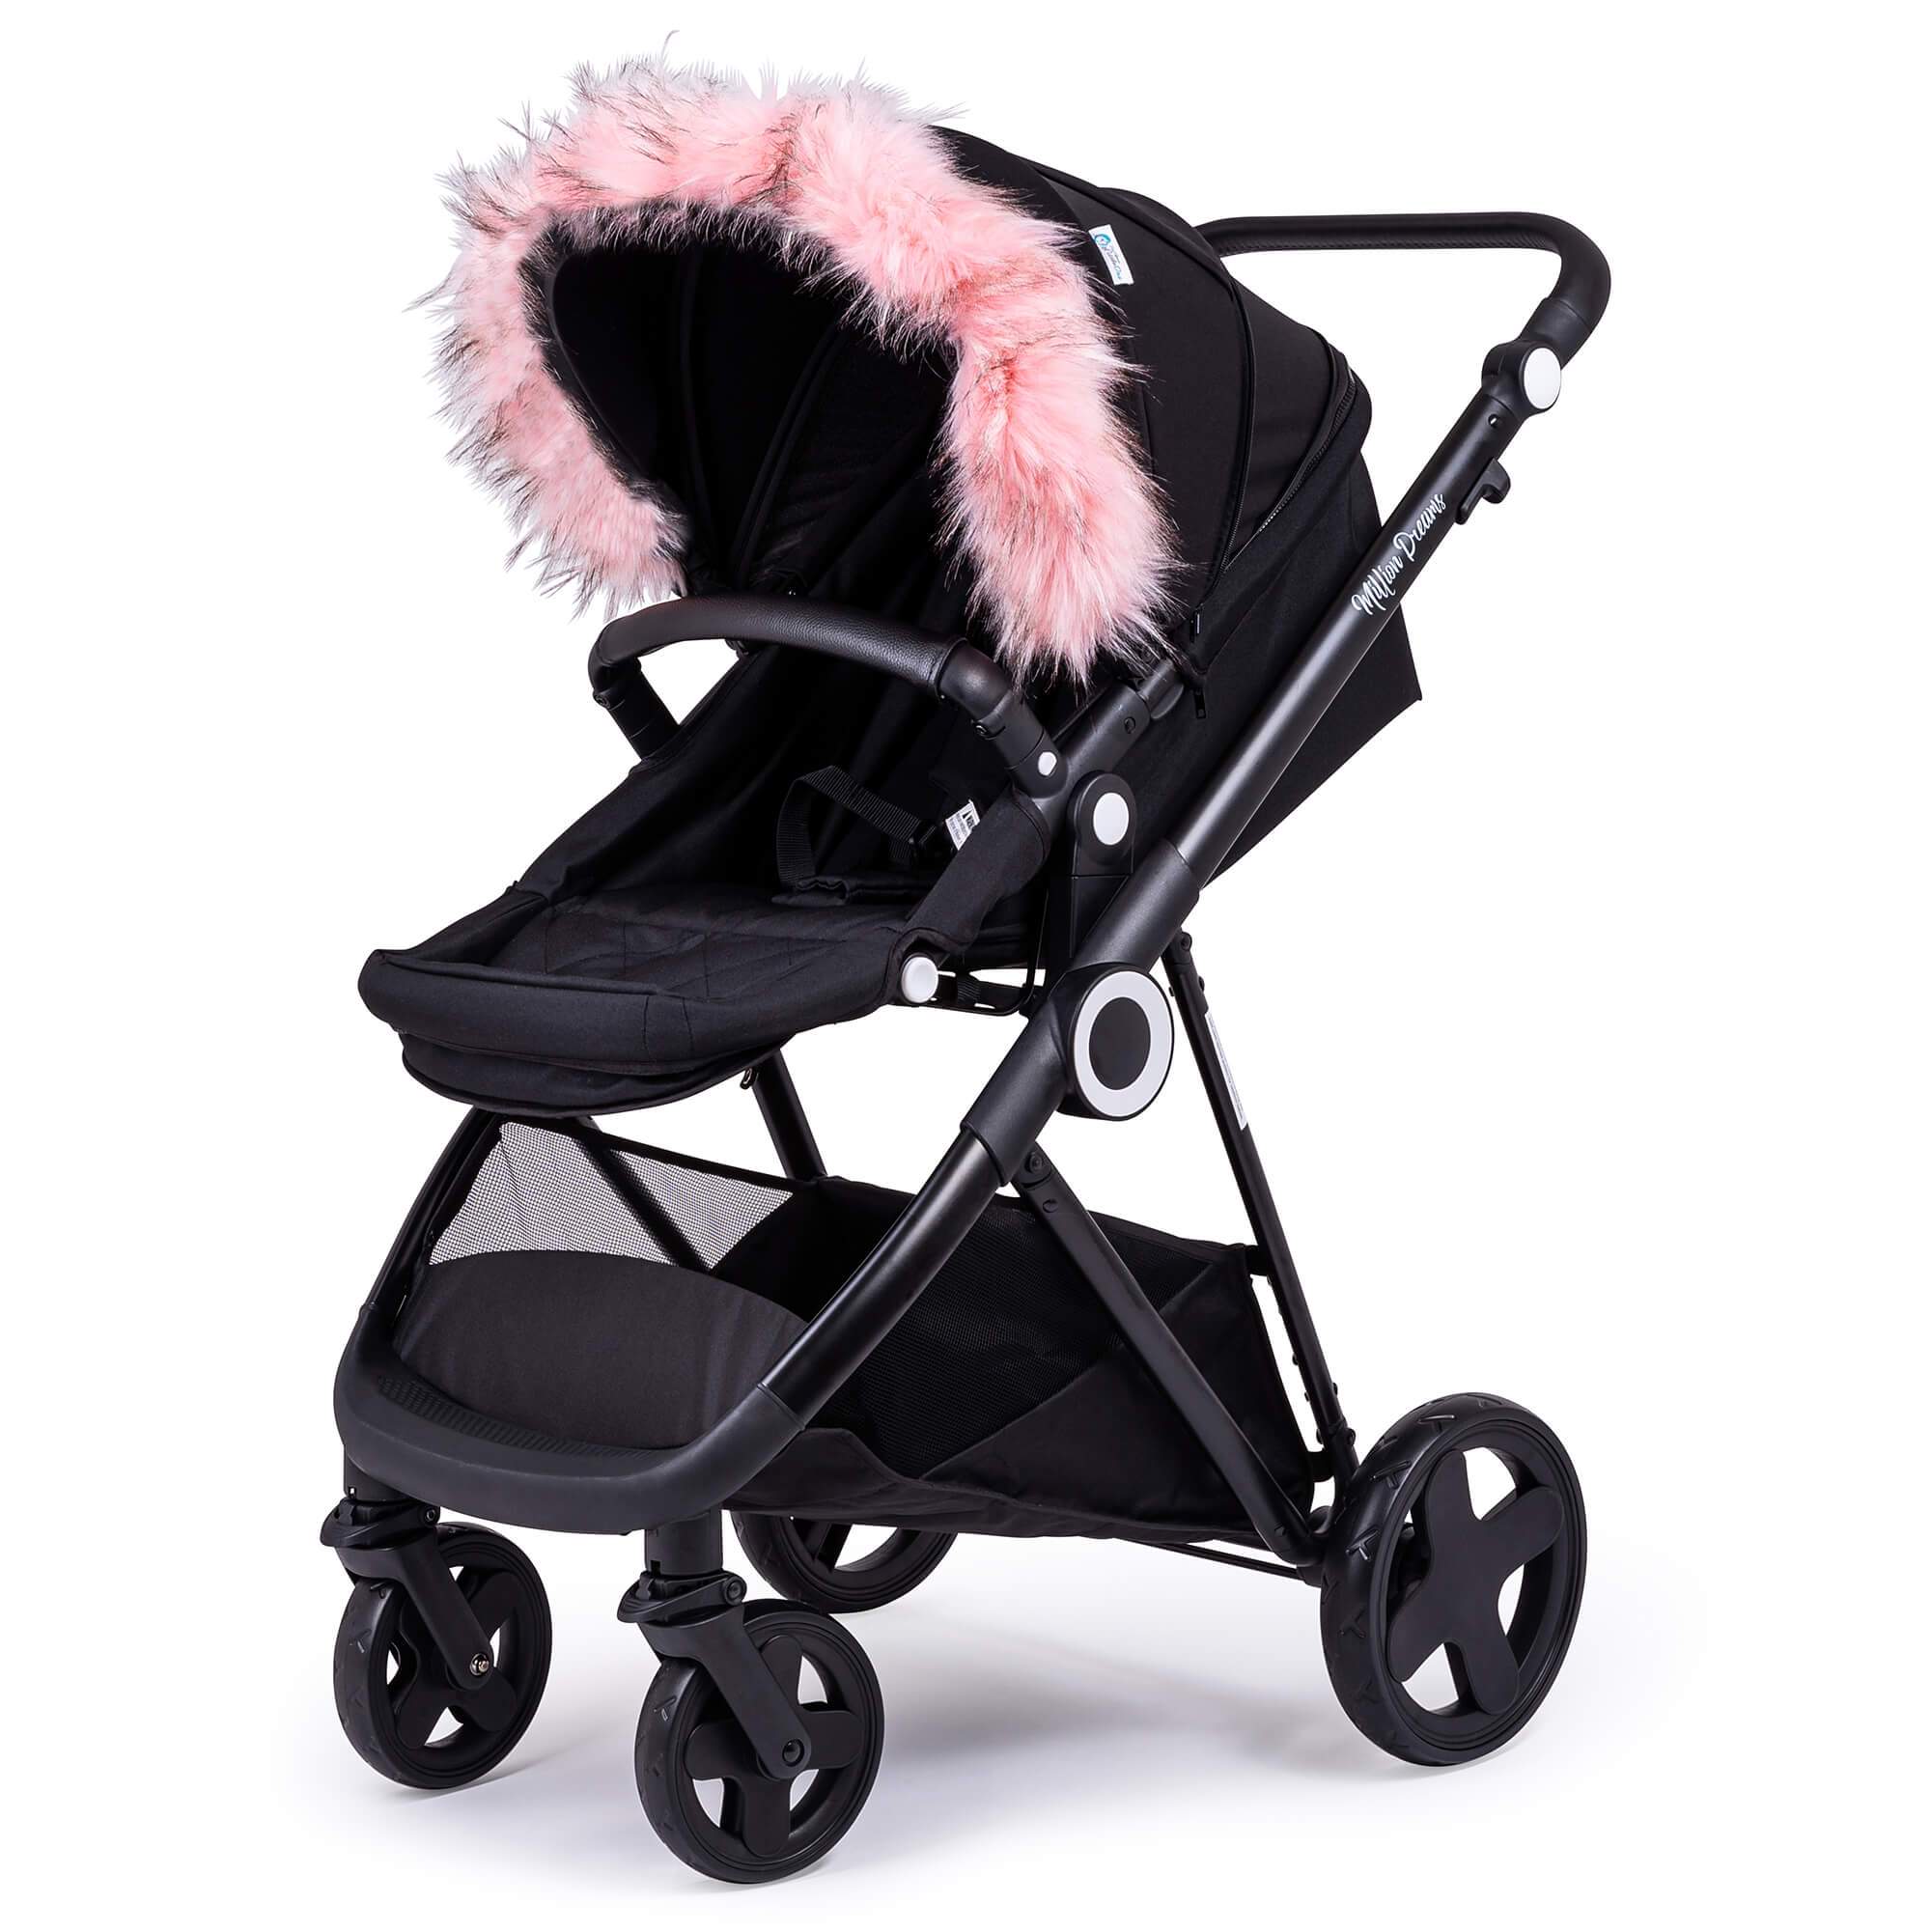 Pram Fur Hood Trim Attachment for Pushchair Compatible with Hybrid - For Your Little One